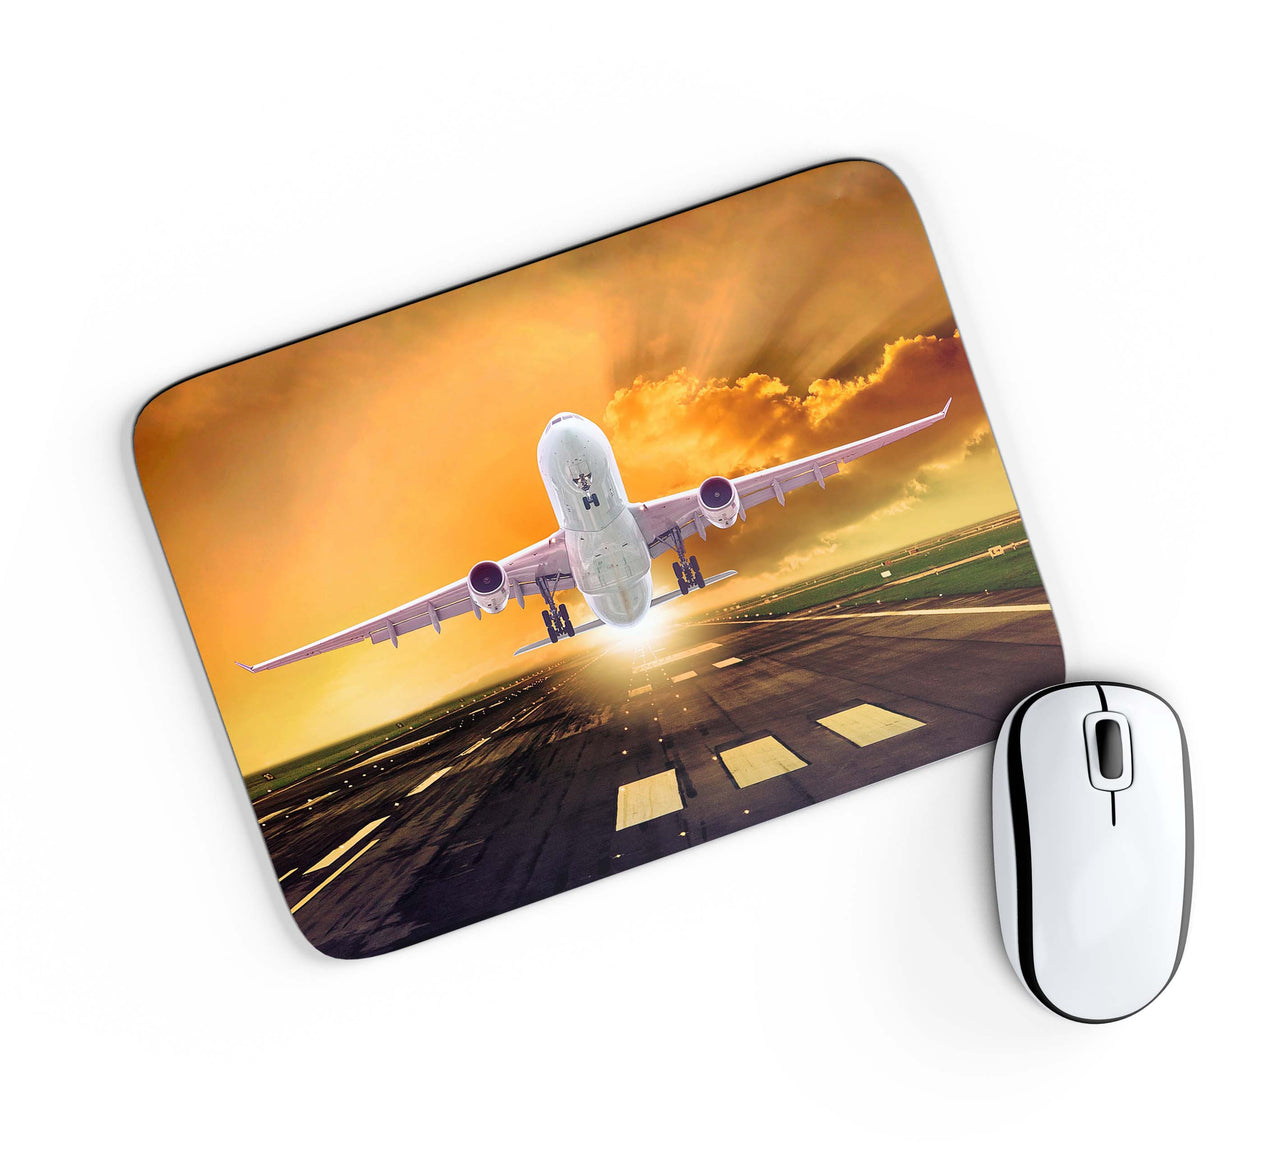 Amazing Departing Aircraft Sunset & Clouds Behind Designed Mouse Pads